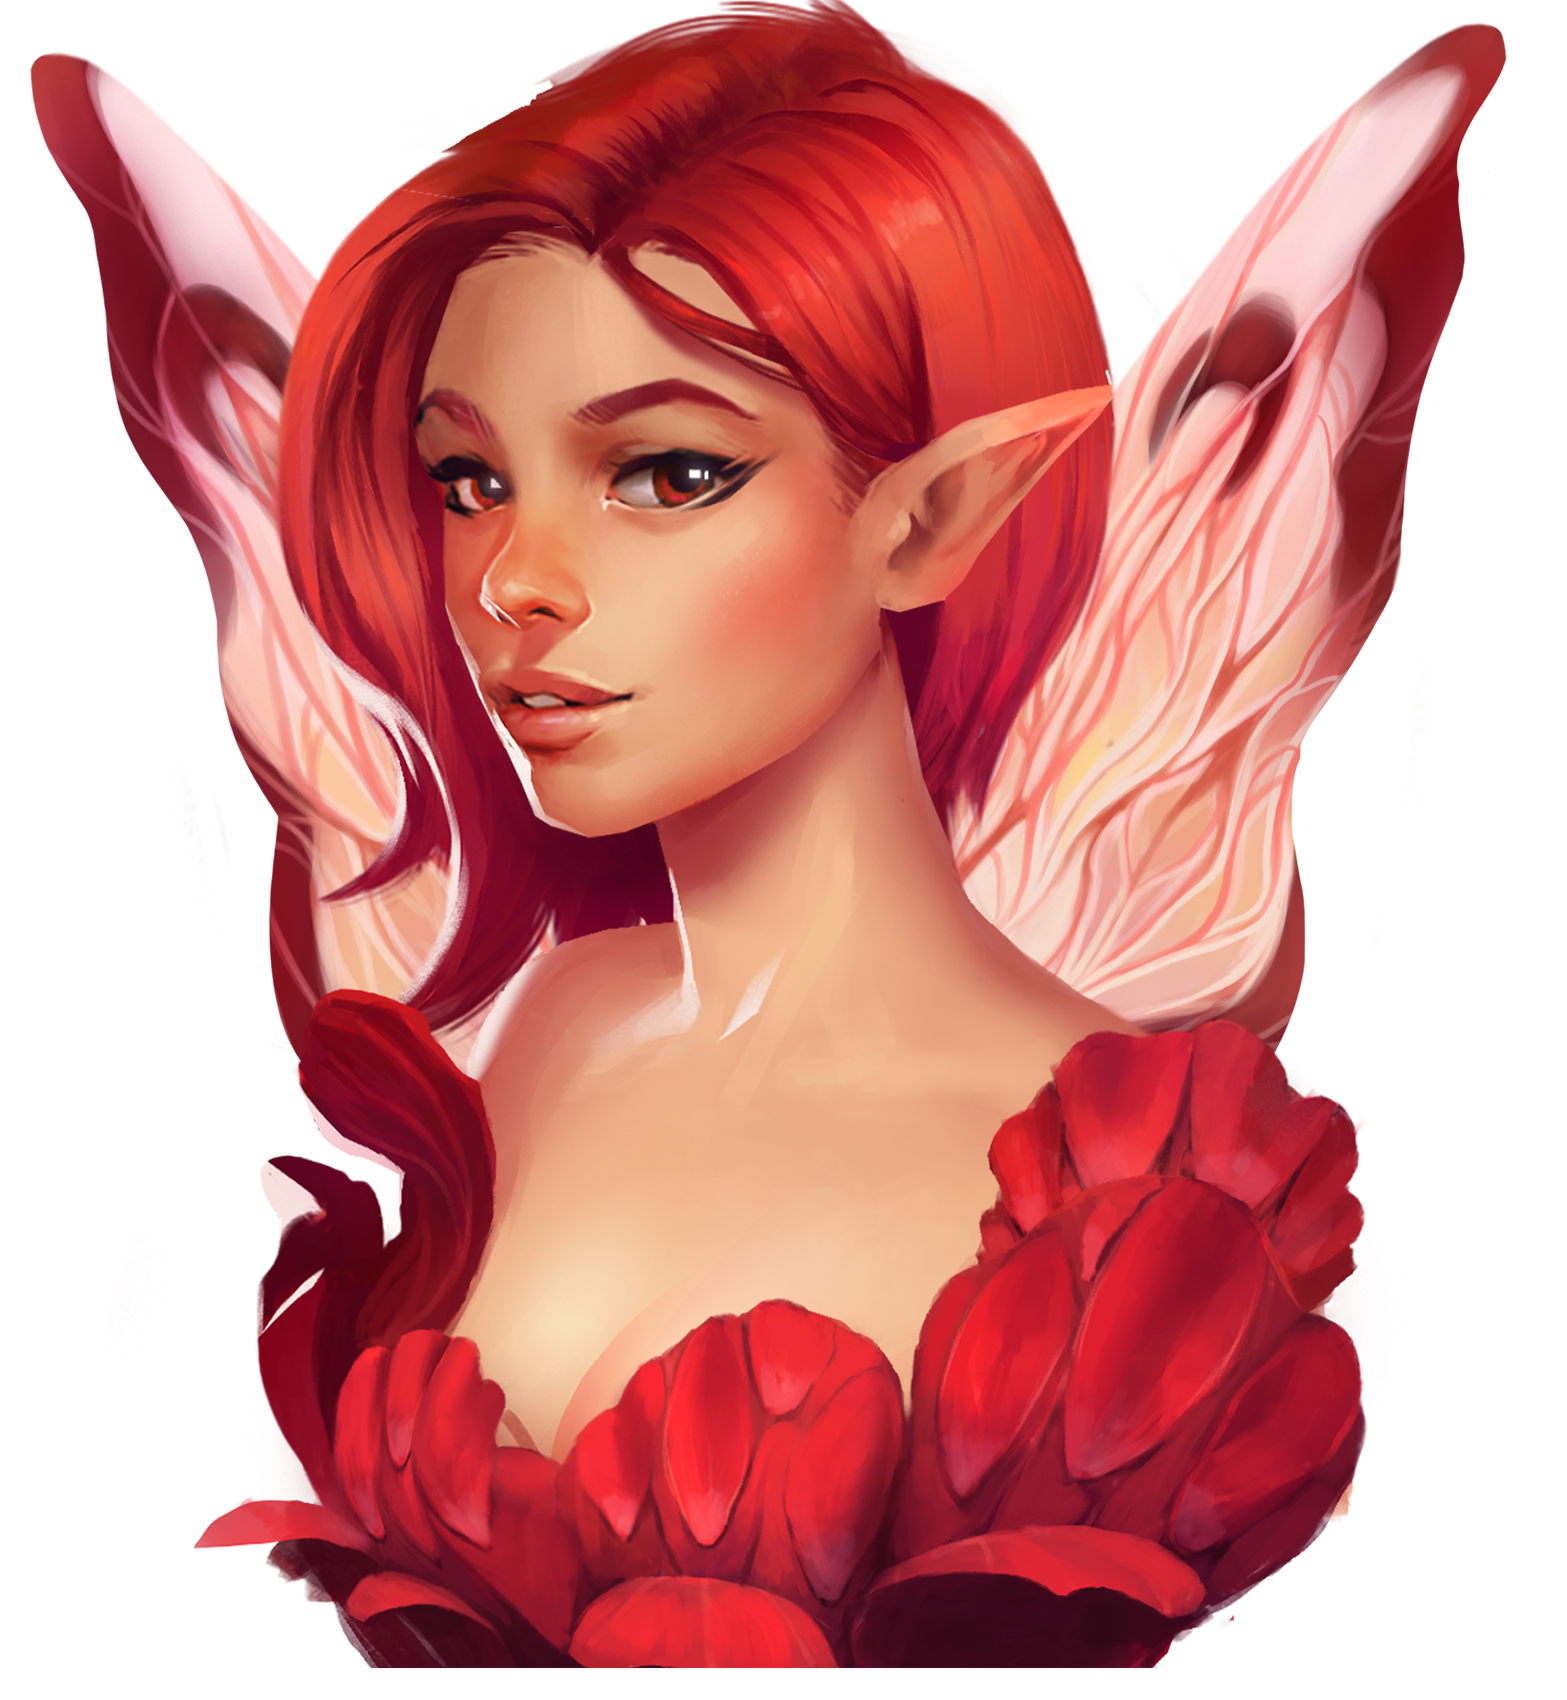 14_character_sym3 red fairy_wingsofriches.png thumbnail